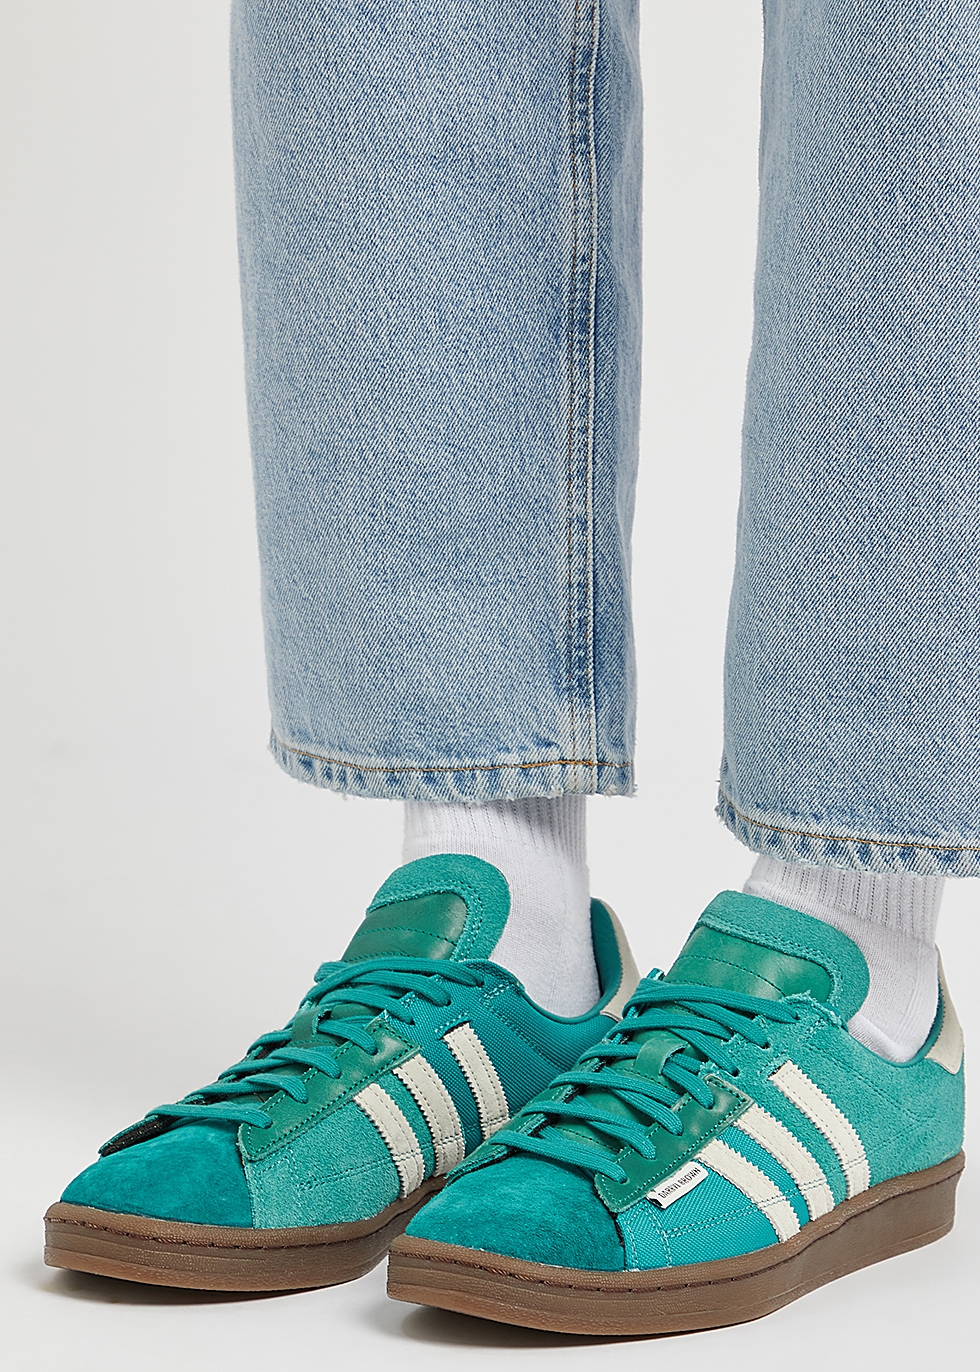 Adidas Darryl Brown Campus 80 Jade Green Off-White GX1656 OUTBACK Sylt ...